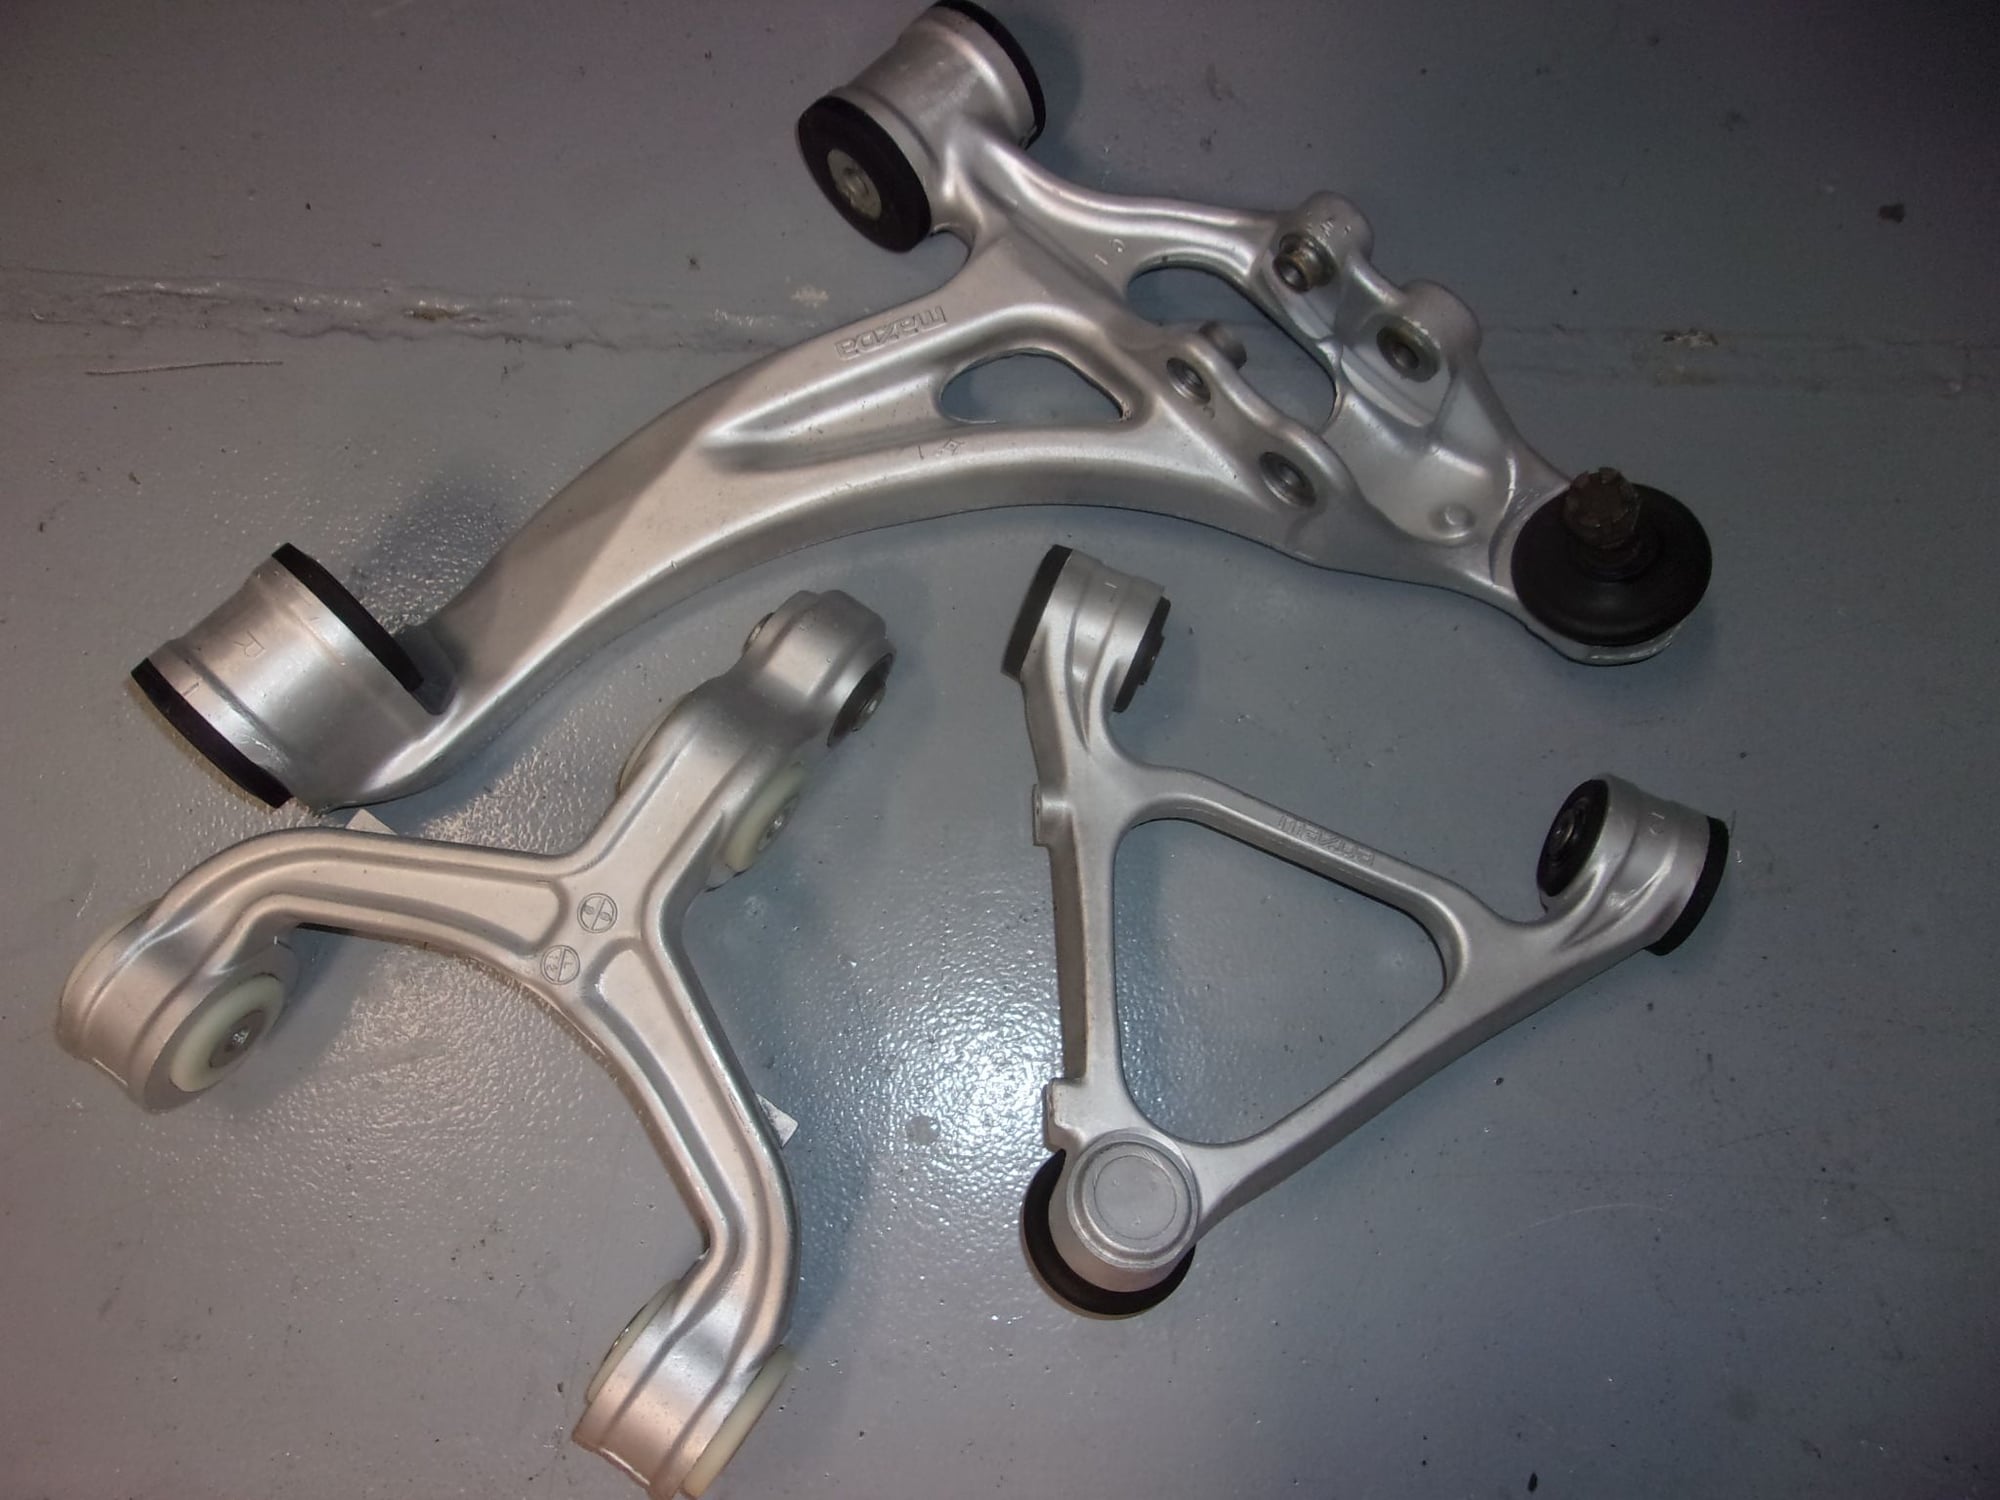 Steering/Suspension - VHT cleaned Suspension Arms & Axles - Used - 1993 to 2002 Mazda RX-7 - Murfreesboro, TN 37130, United States